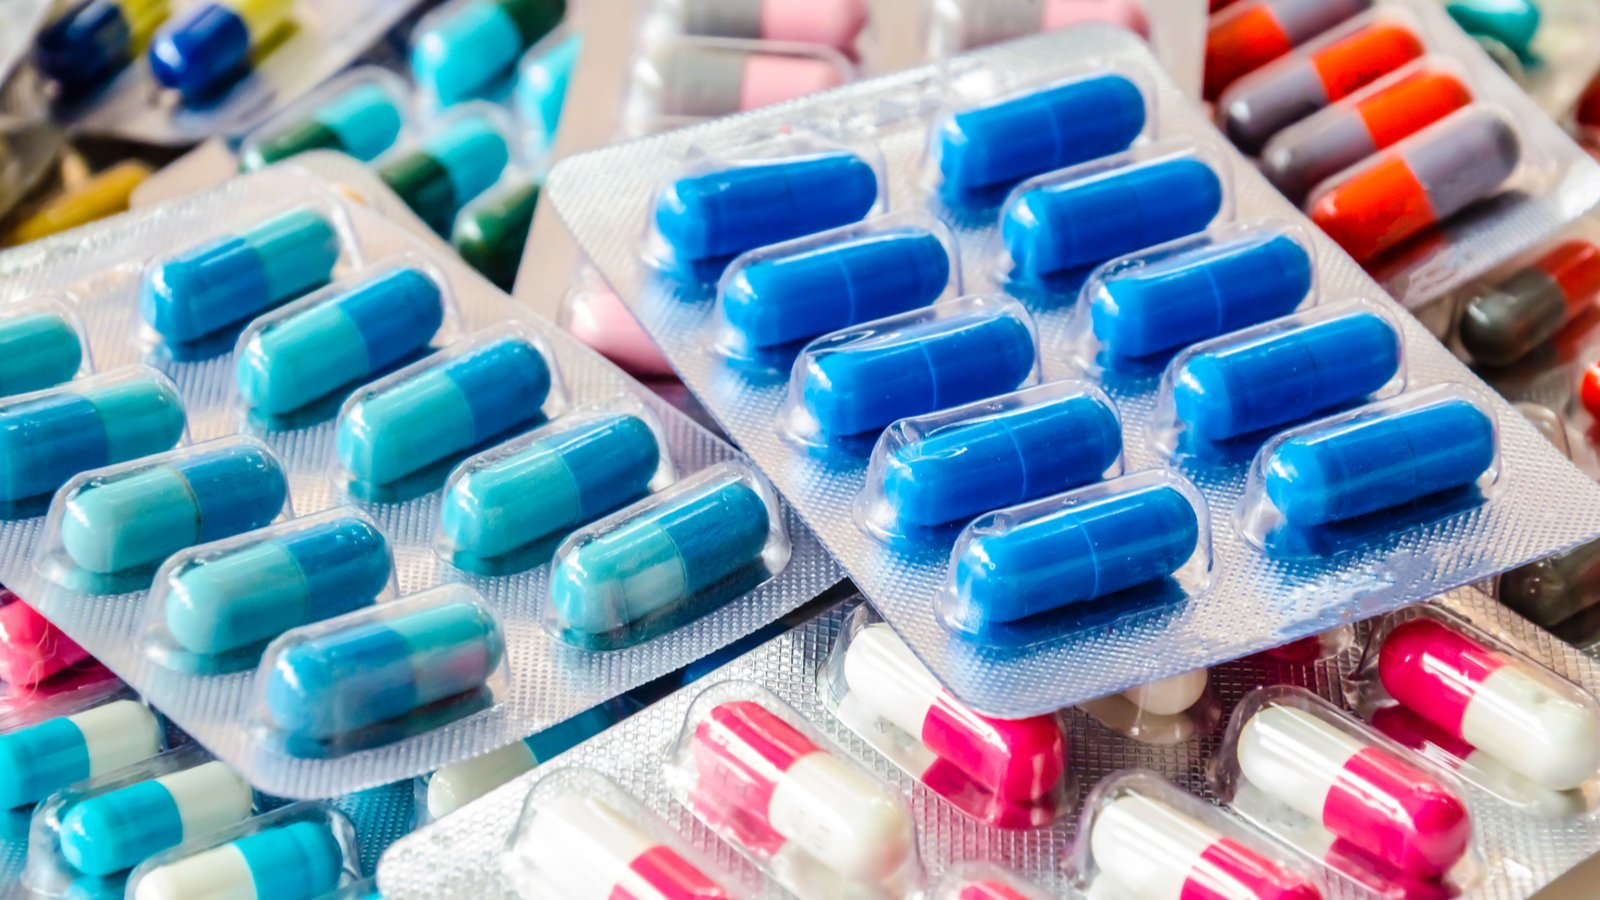 Packs of blue and pink pills are piled on top of each other representing ANVS Stock.